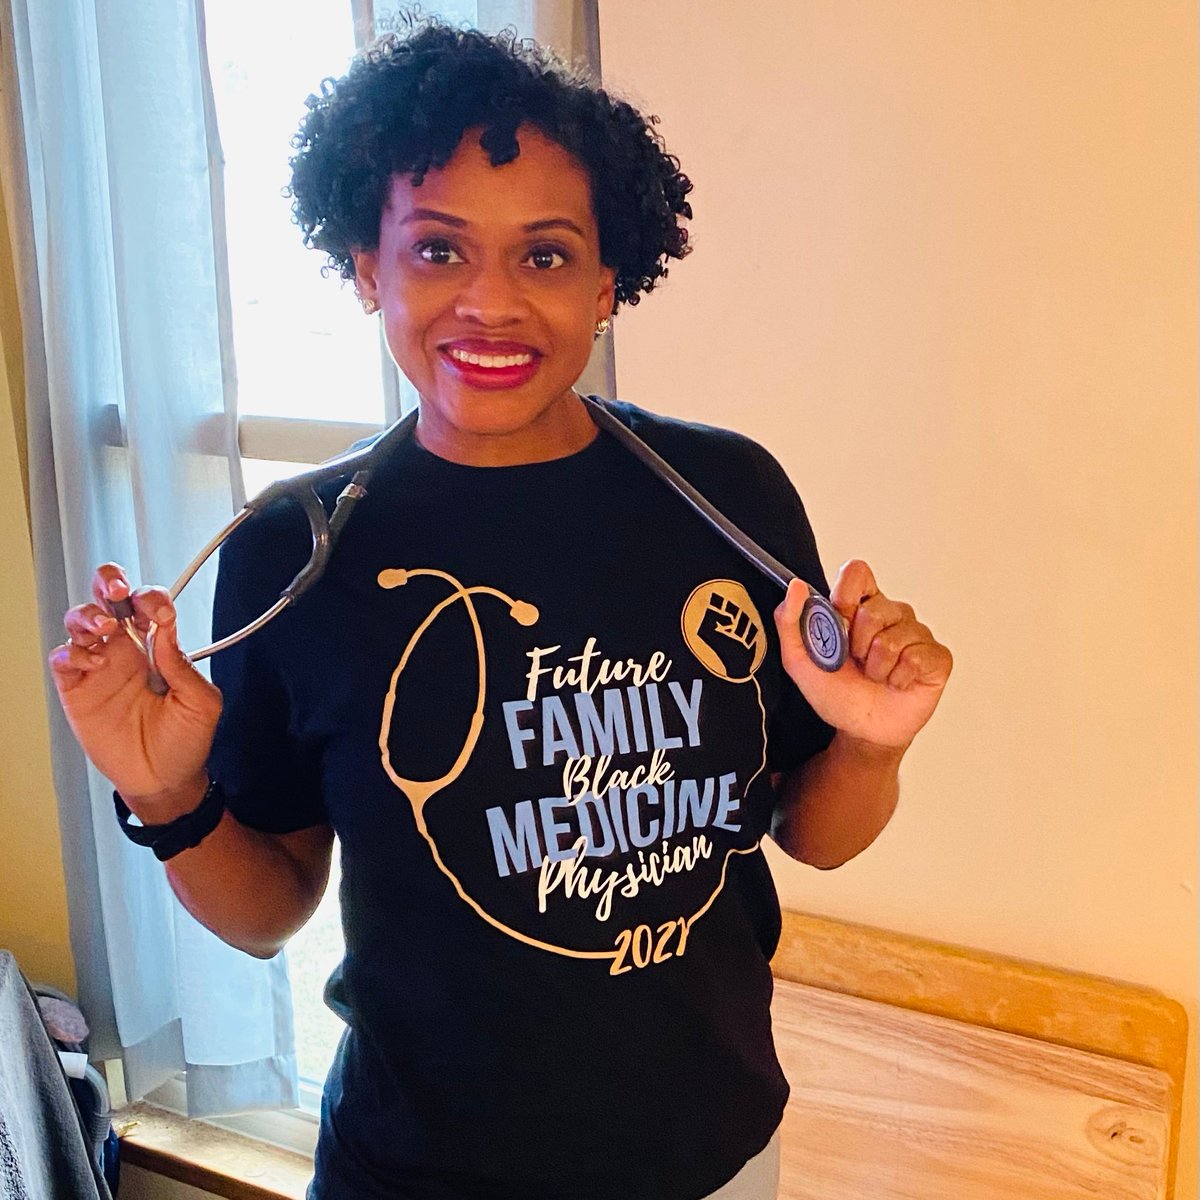 I chose FM because of the opportunity to build a personal relationship with patients that empowers them to reach their health goals. So Proud to be joining #FMRevolution!!!! #BlackFamMedMatch Coming to a program near you! #ABFMP #Match2021